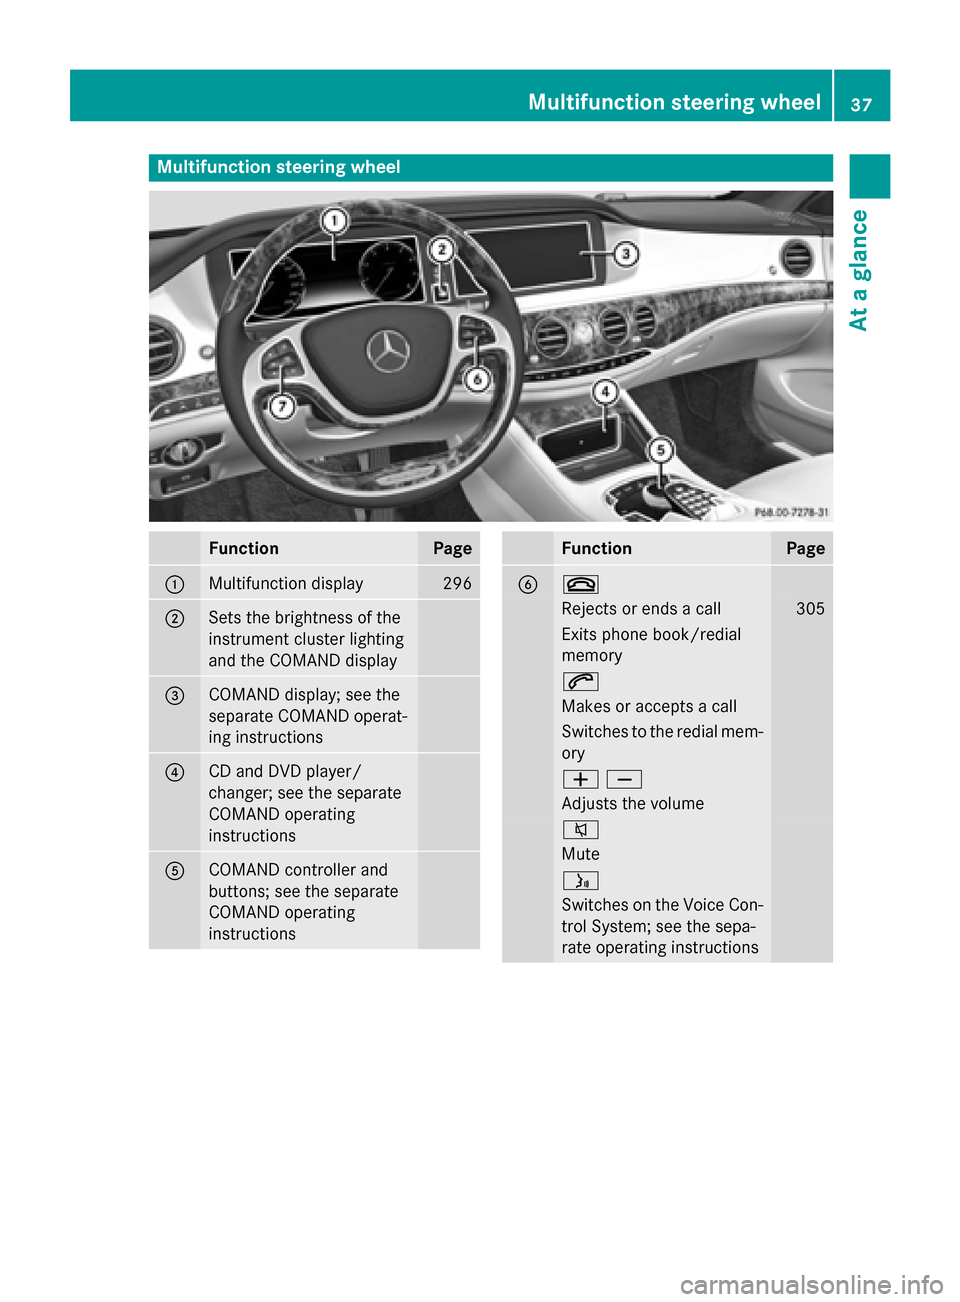 MERCEDES-BENZ S-Class 2015 W222 Owners Guide Multifunction steering wheel
Function Page
:
Multifunction display 296
;
Sets the brightness of the
instrument cluster lighting
and the COMAND display
=
COMAND display; see the
separate COMAND operat-